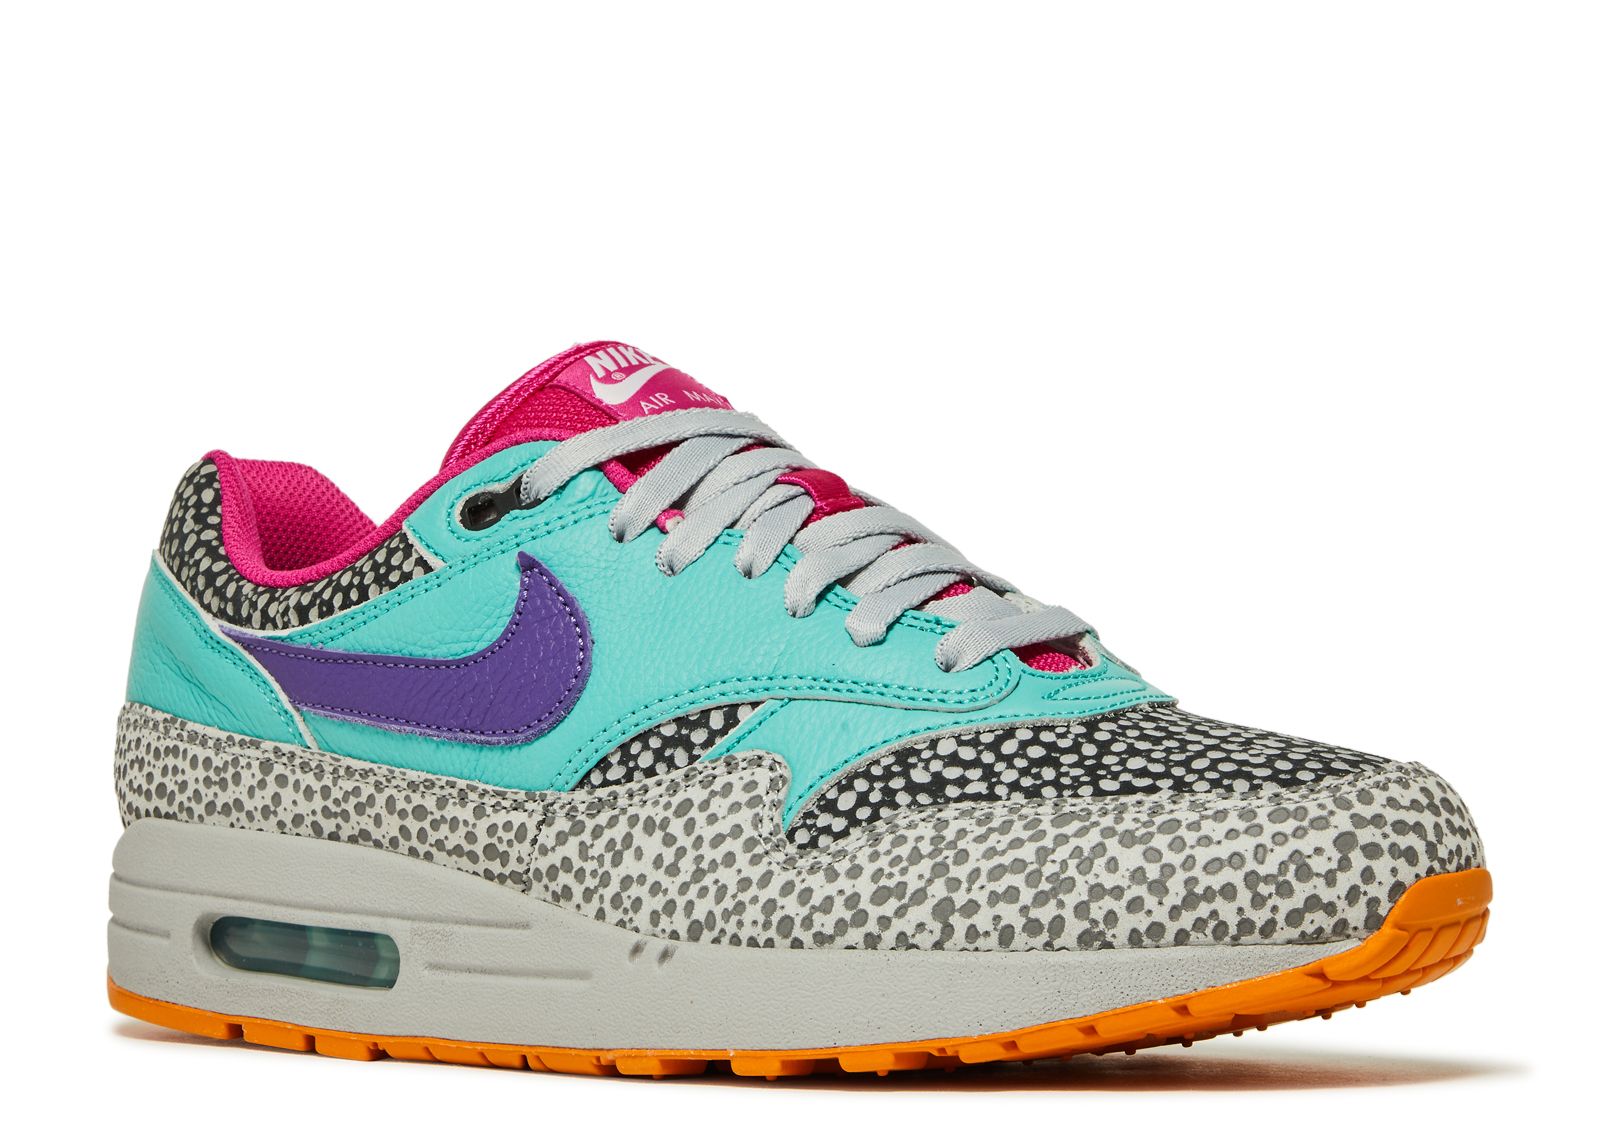 Air Max 1 'Safari Suede' Unlocked By You - Nike DO7414 XXX - multi-color/multi-color/multi-color | Flight Club